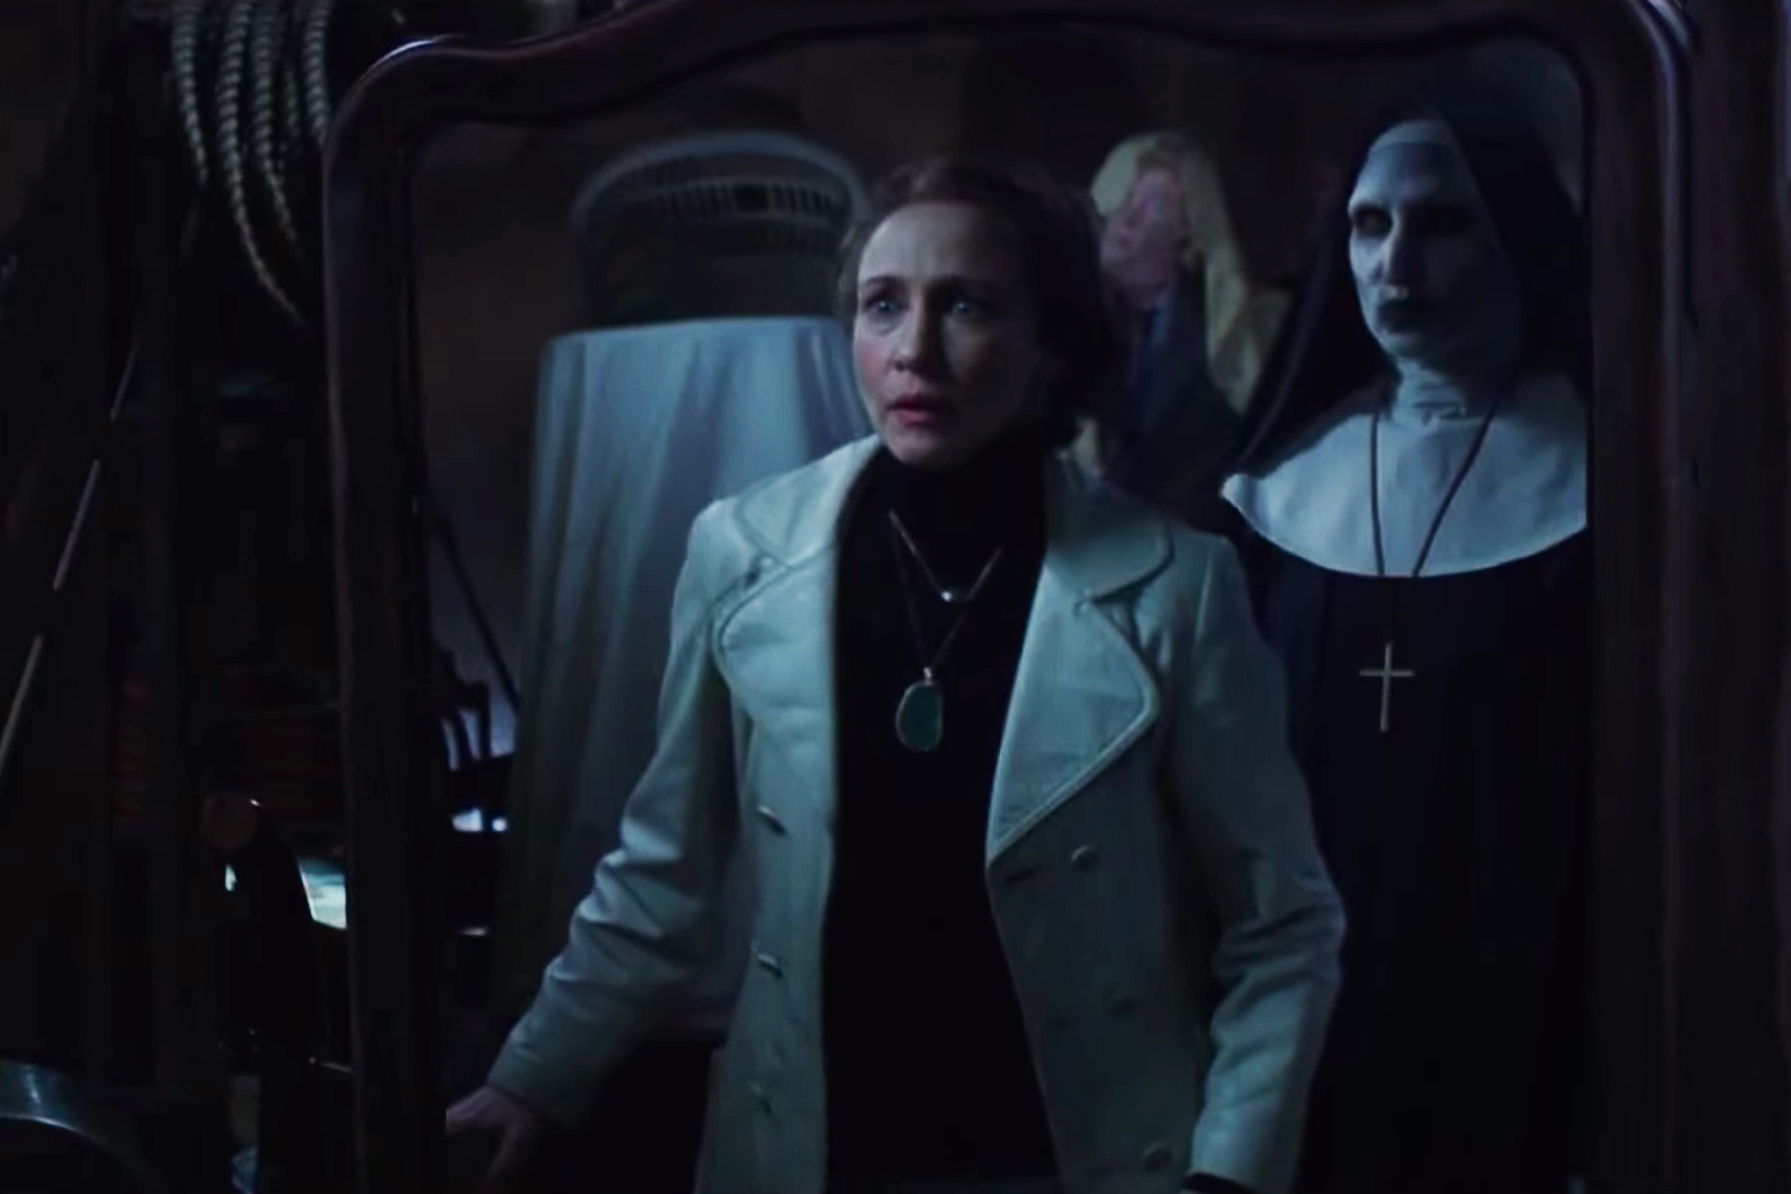 the conjuring 2 hd online watch